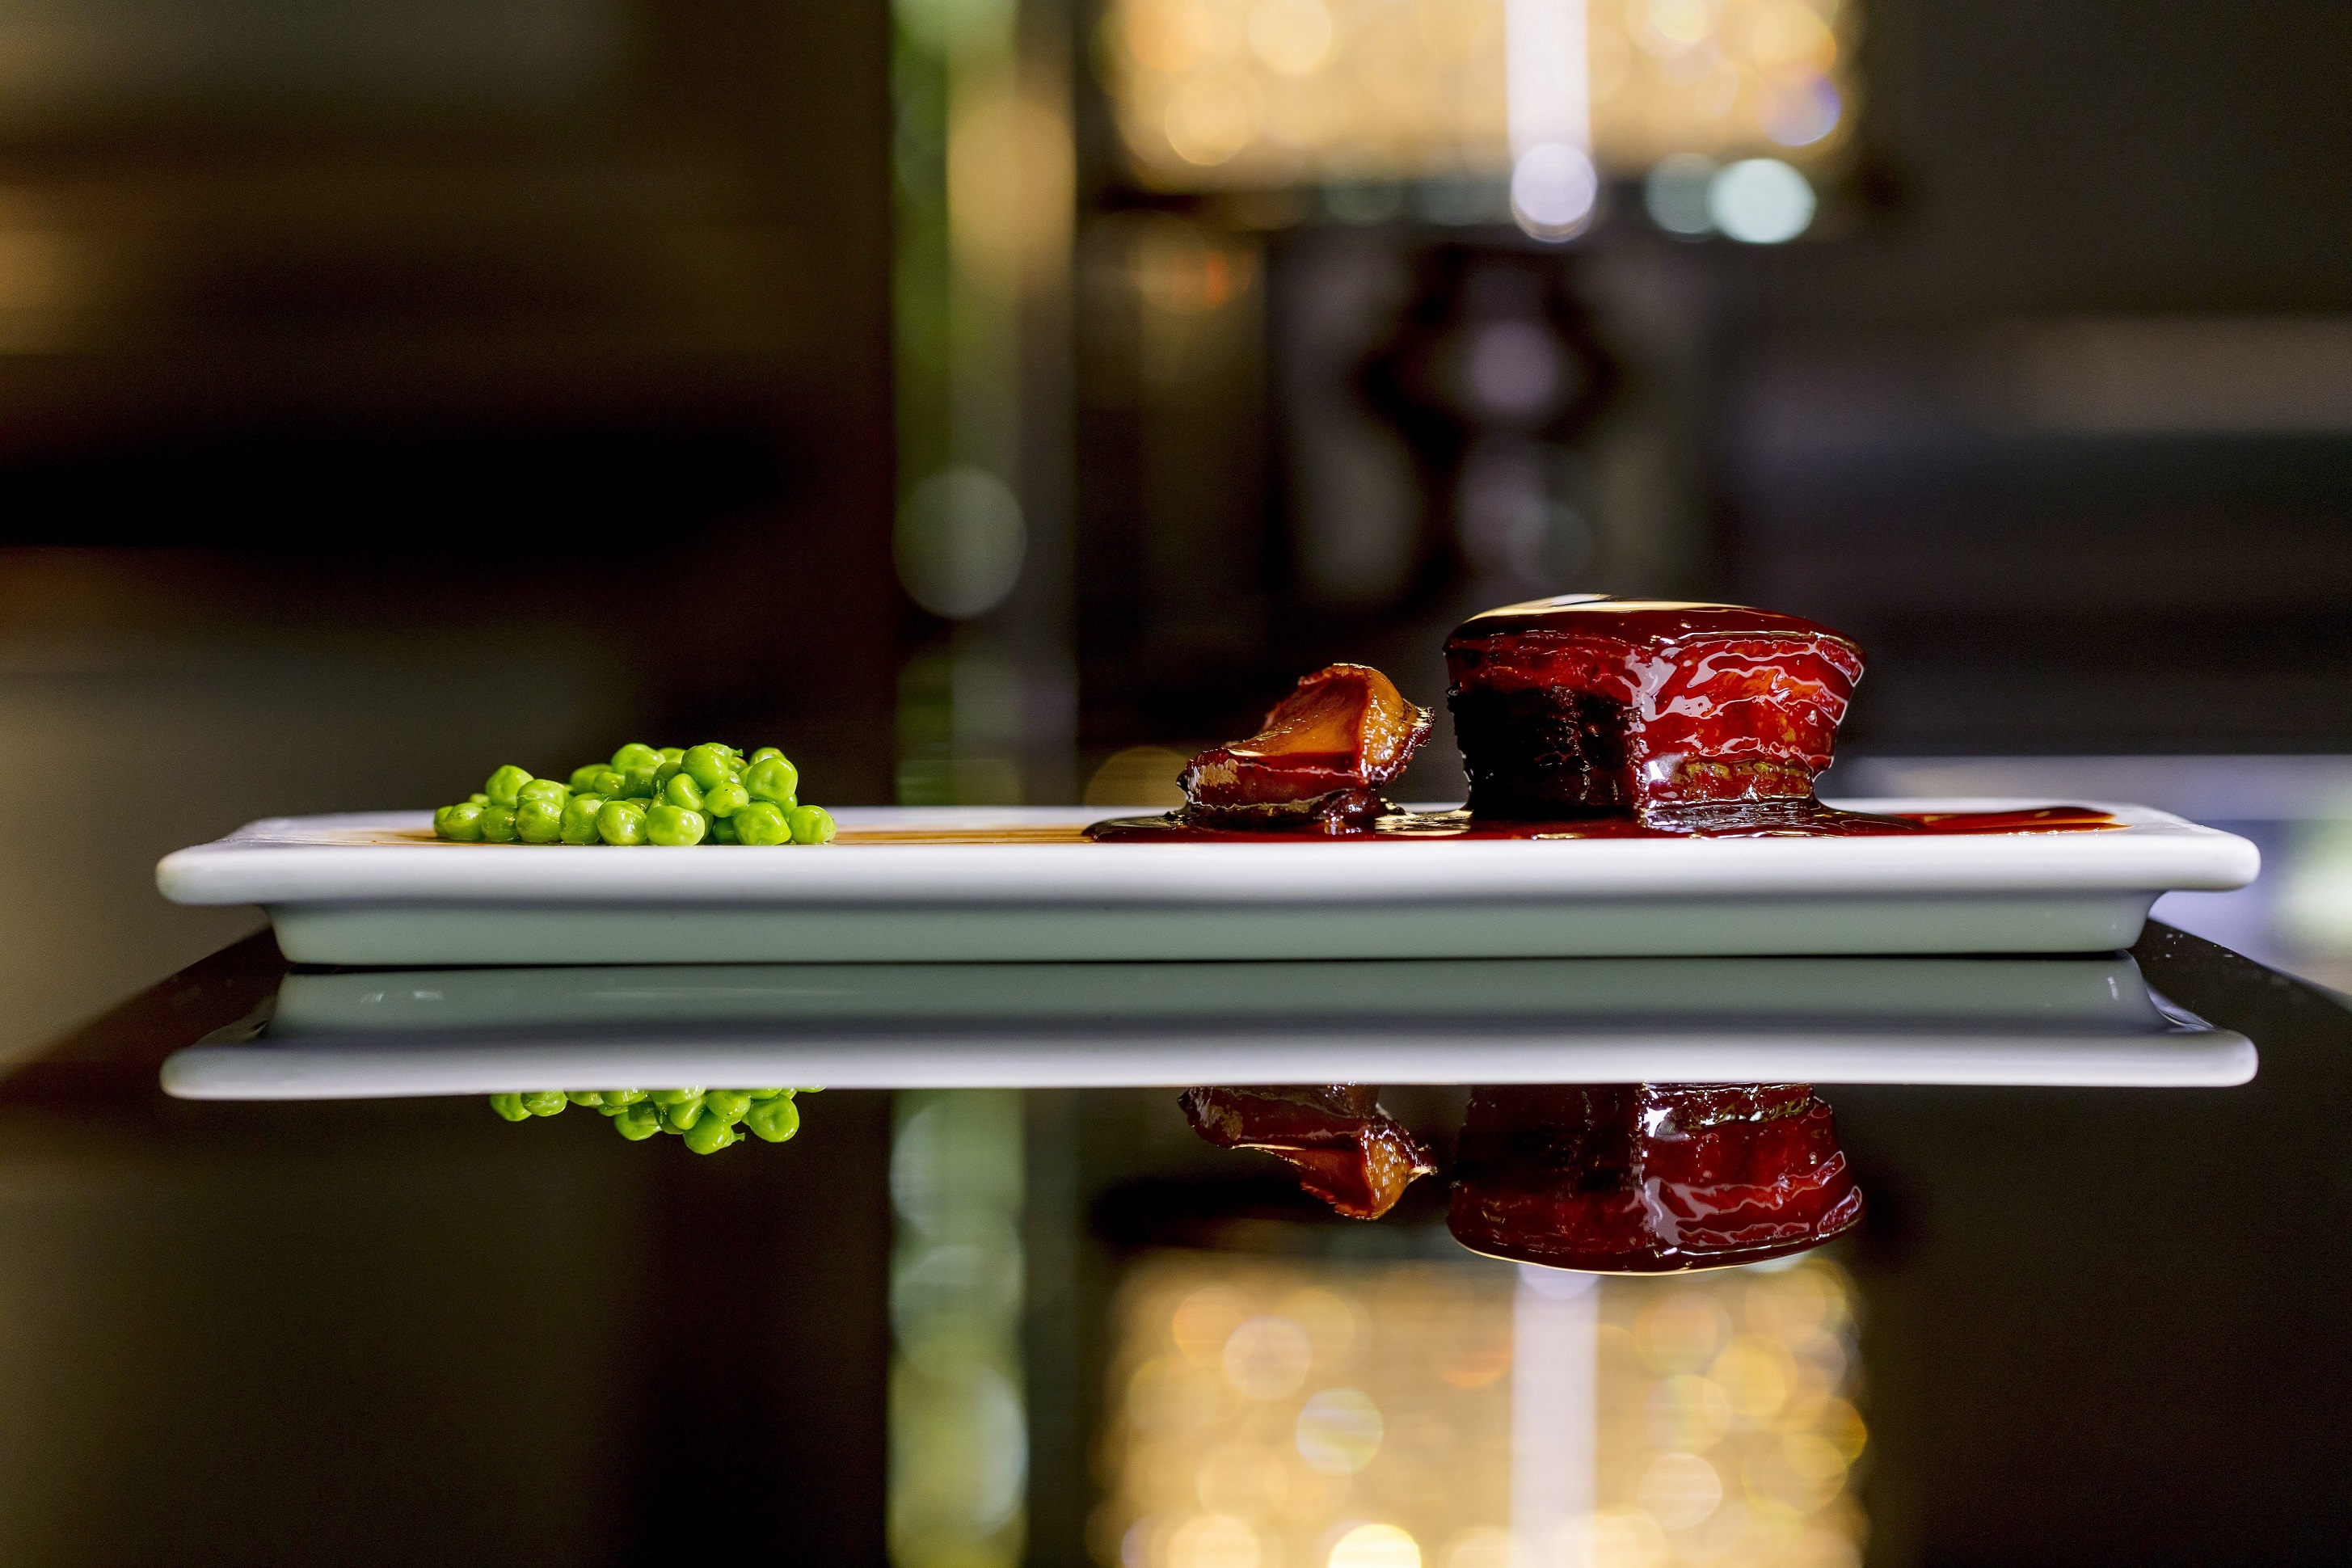 Shanghainese Braised Pork Belly and Abalone in Sweet Soy Sauce, Peas^